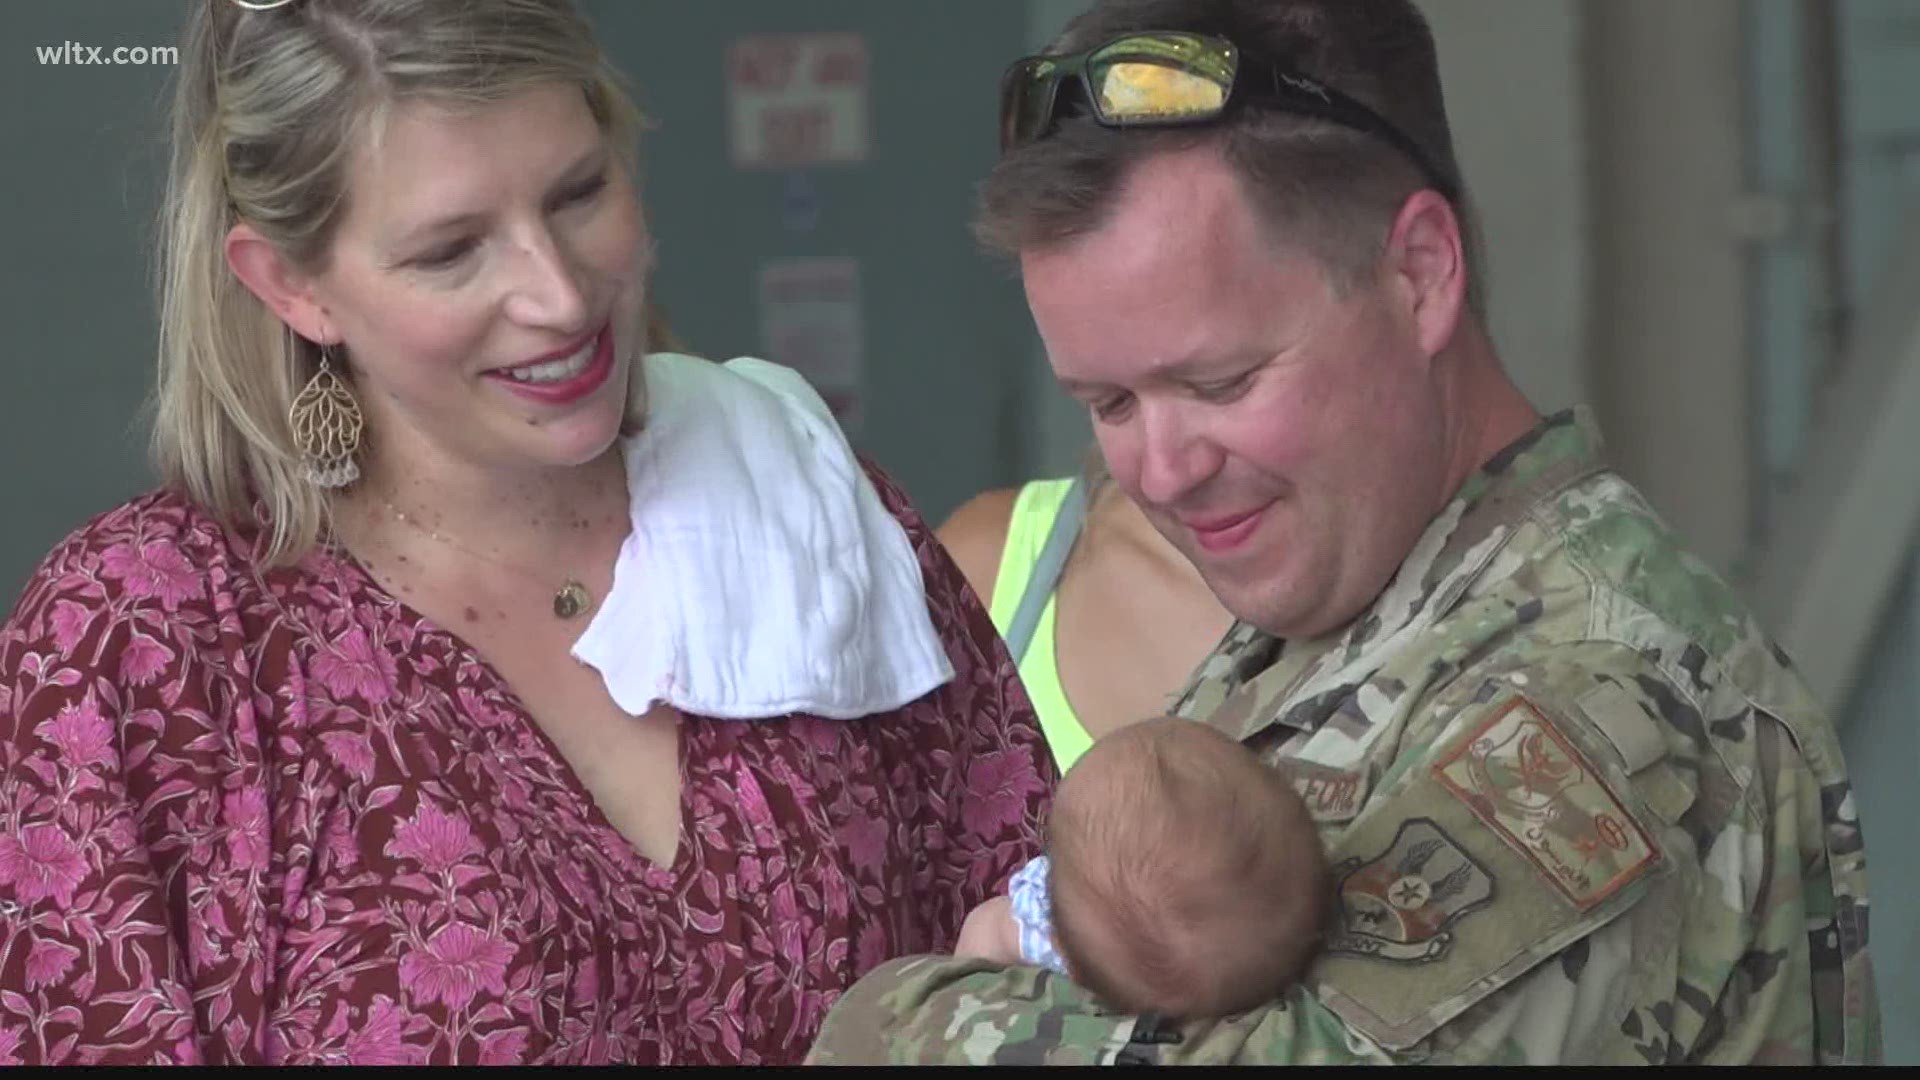 Grady Patterson was overseas for over 3 months missing the birth of his third child.